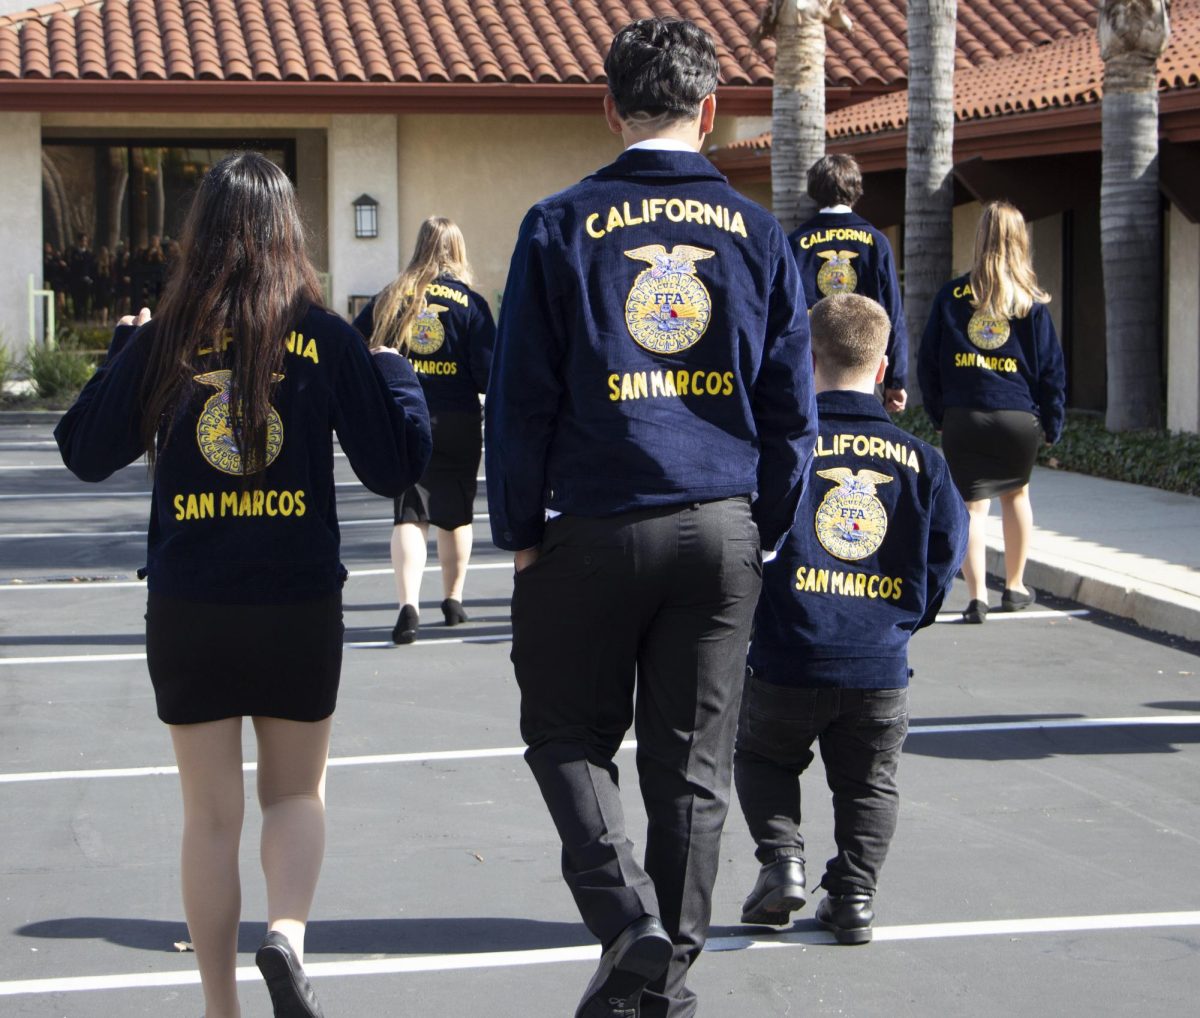 Photo+of+FFA+students+with+their+FFA+jackets+that+read+California+San+Marcos%2C+with+an+FFA+seal+in+the+center.